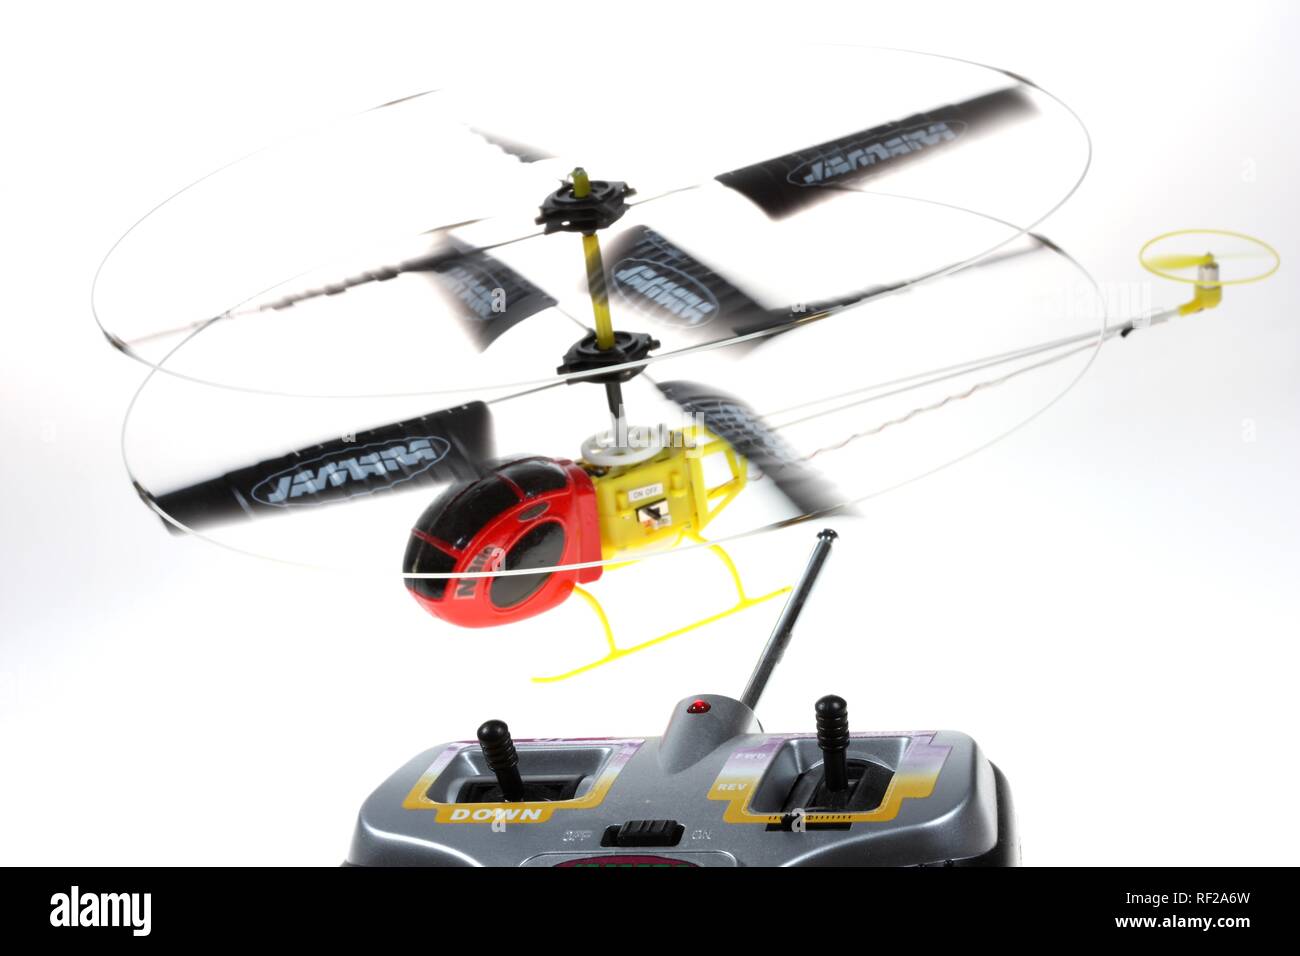 Remote controlled toy helicopter, minature model flown indoors Stock Photo